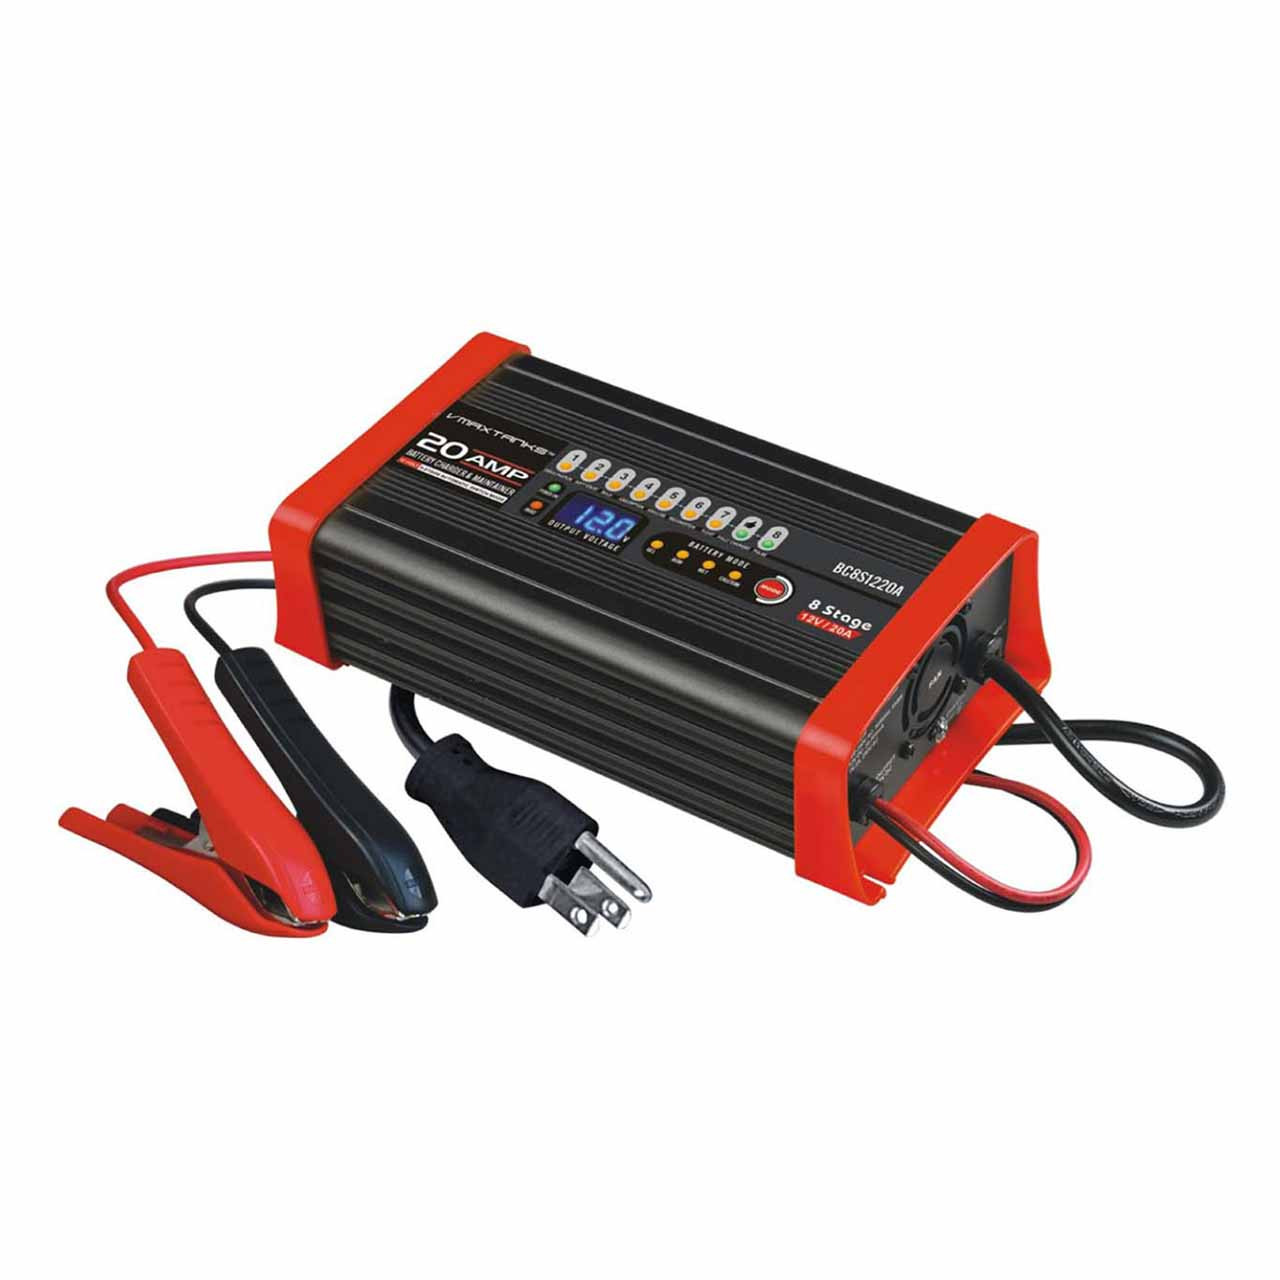 VMAX 12V AGM Battery Charger (20A 8 Stage) - BC8S1220A